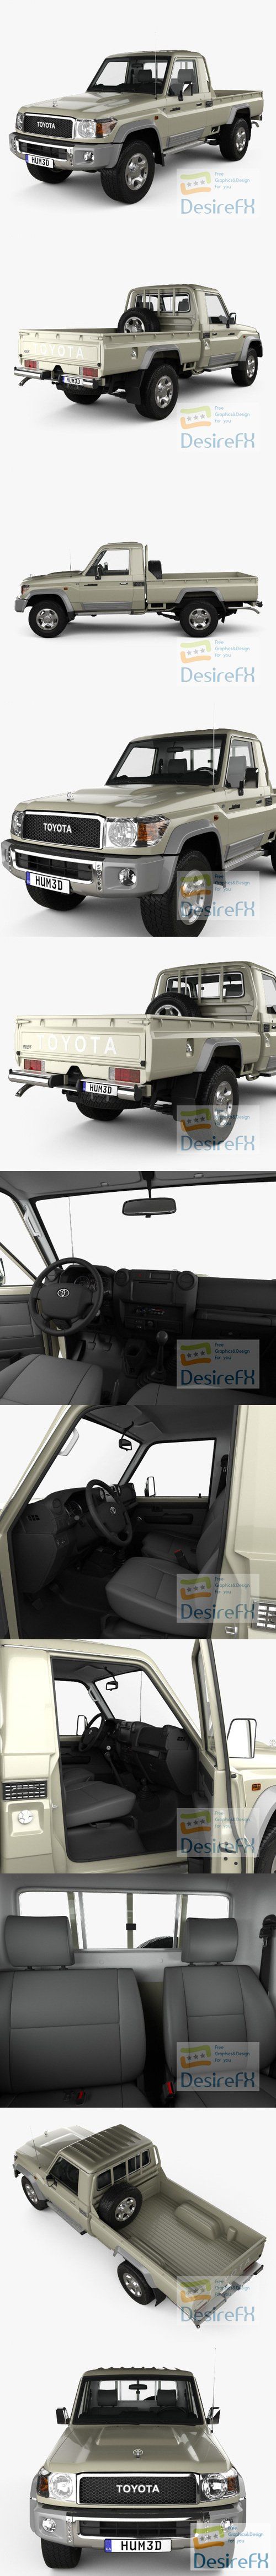 Toyota Land Cruiser Single Cab Pickup with HQ interior 2007 3D Model